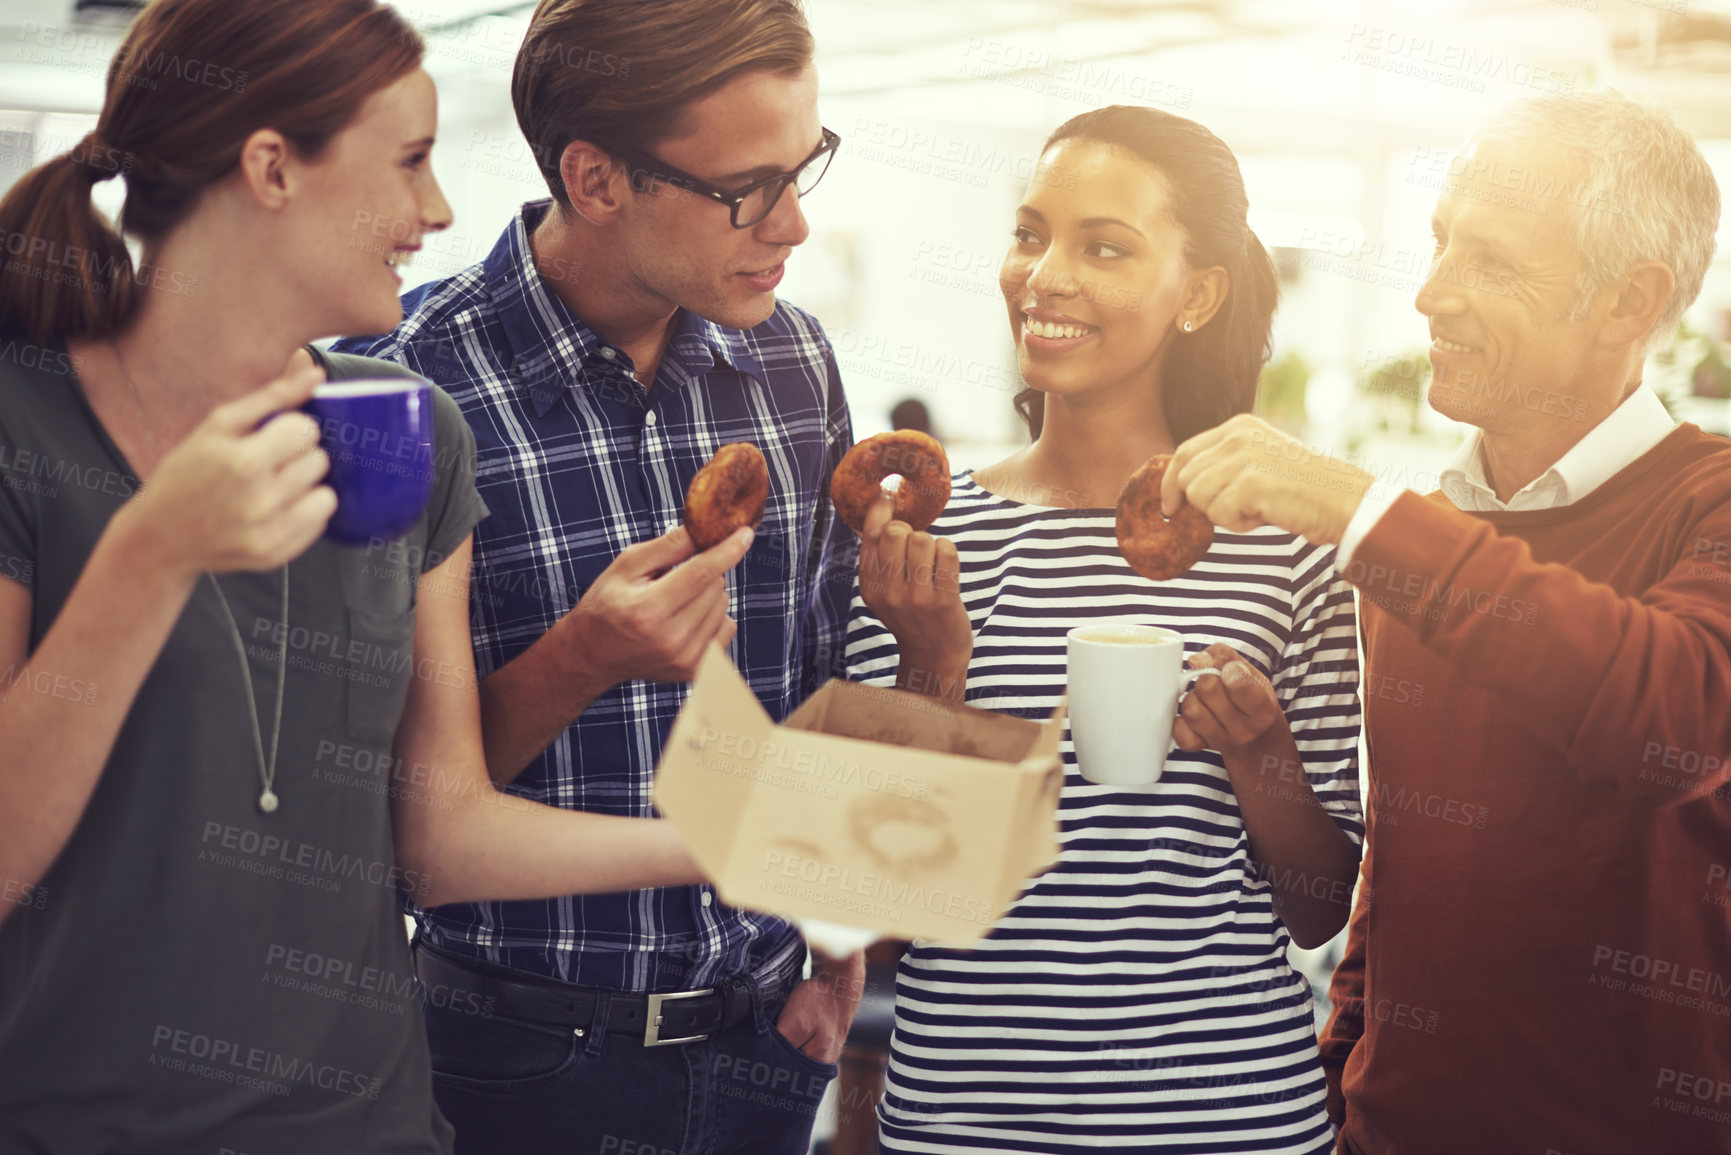 Buy stock photo Shot of a group of coworkers eating donuts while standing in an office